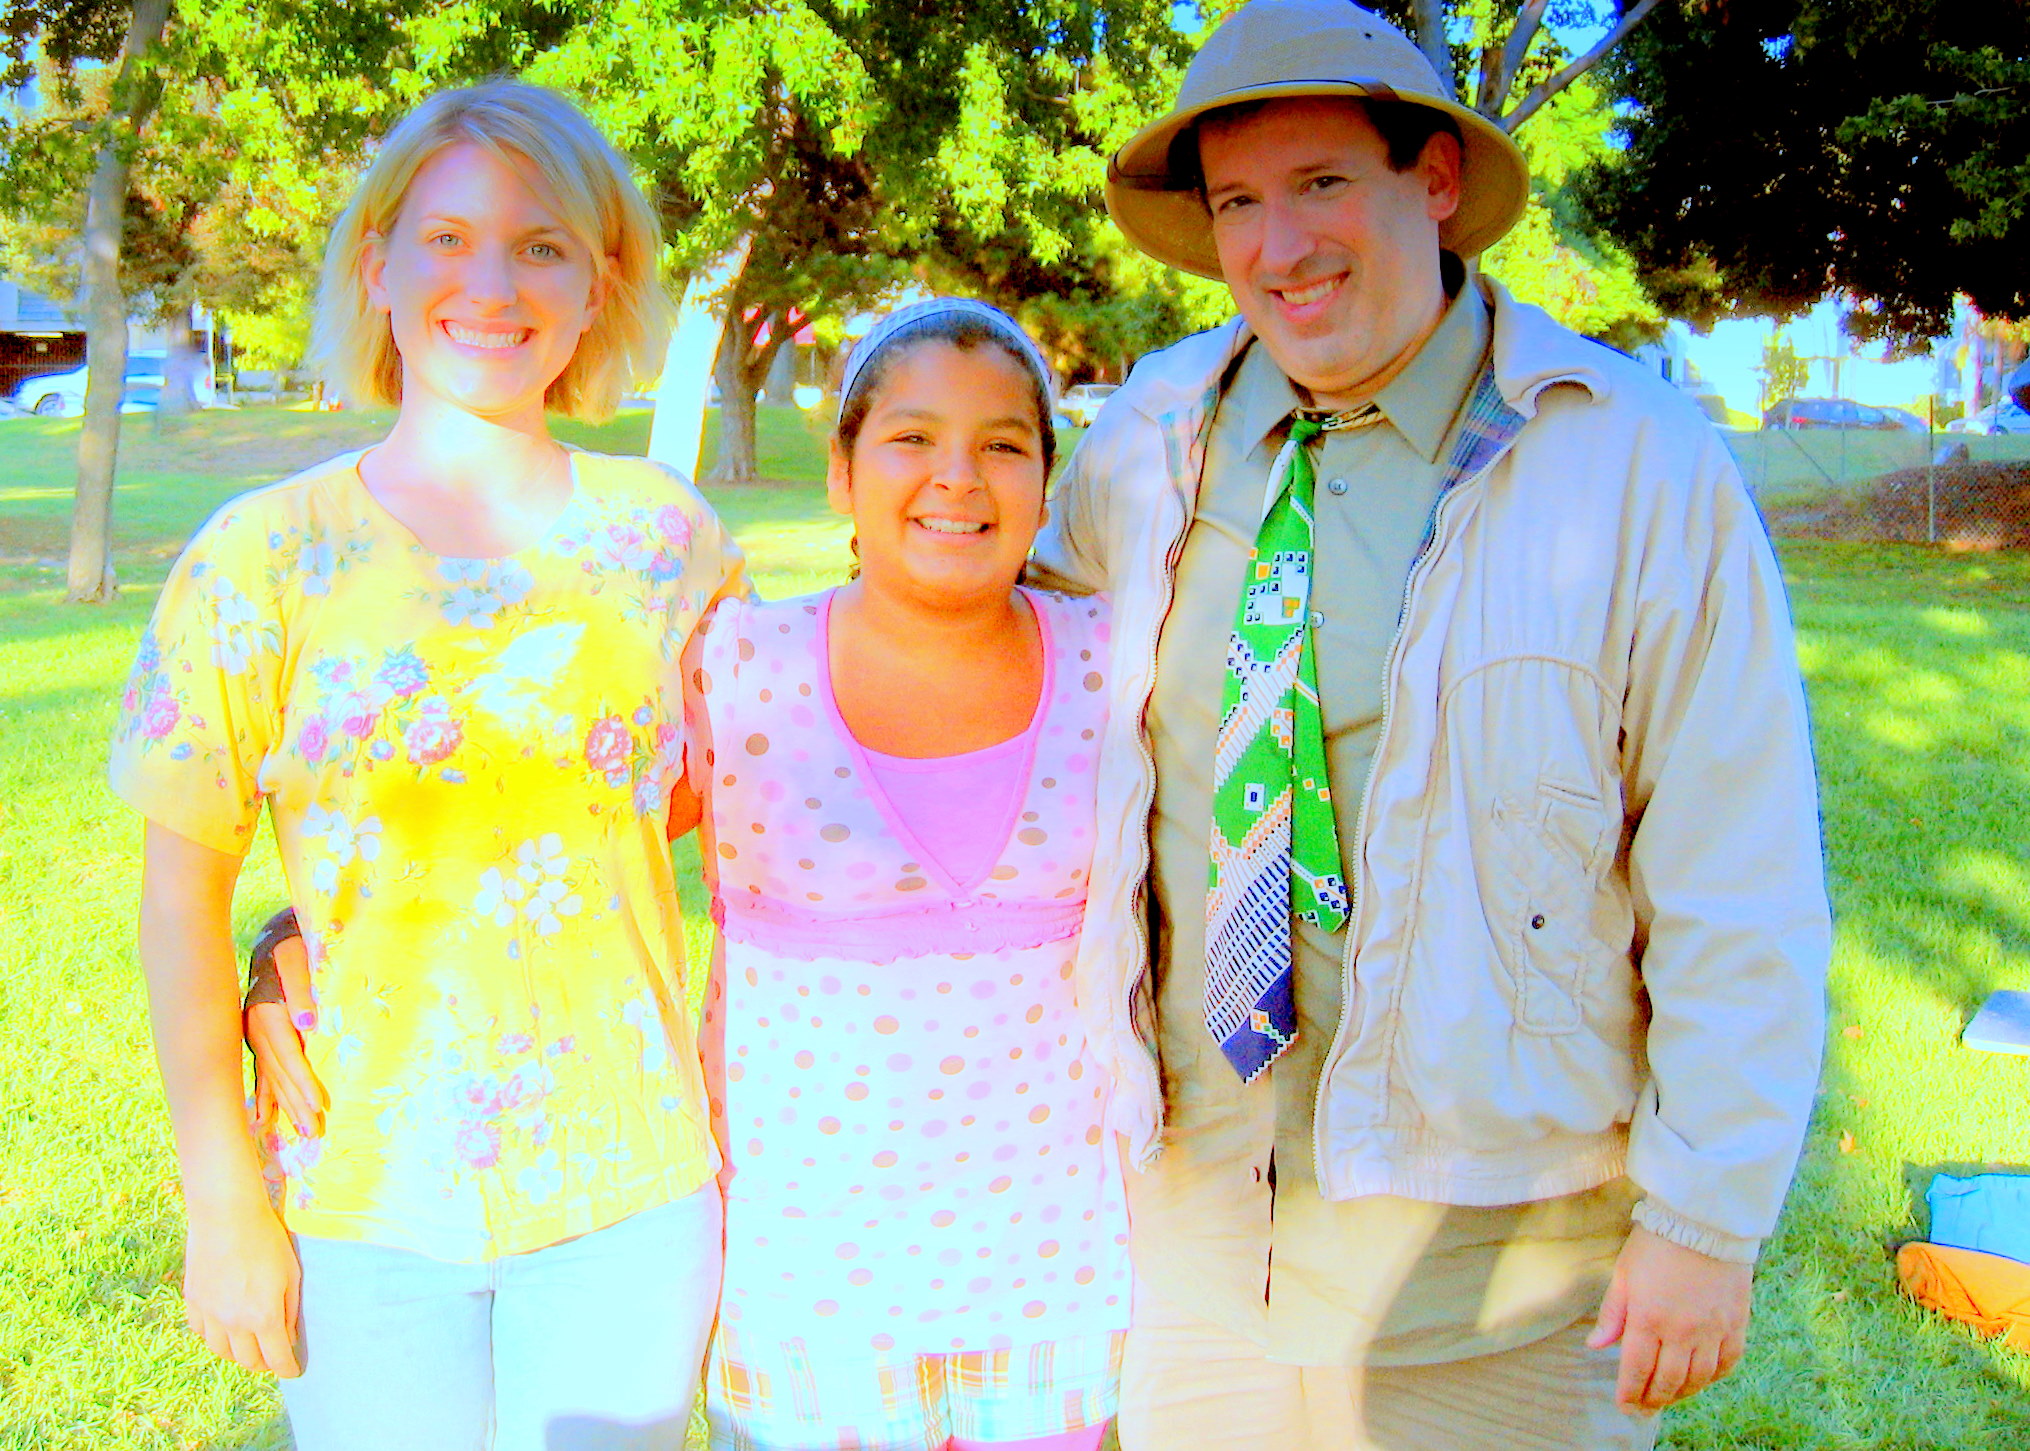 Taylor Dooley, Alexa, and Lee Schall on the set of 'Reptile Rescue.'